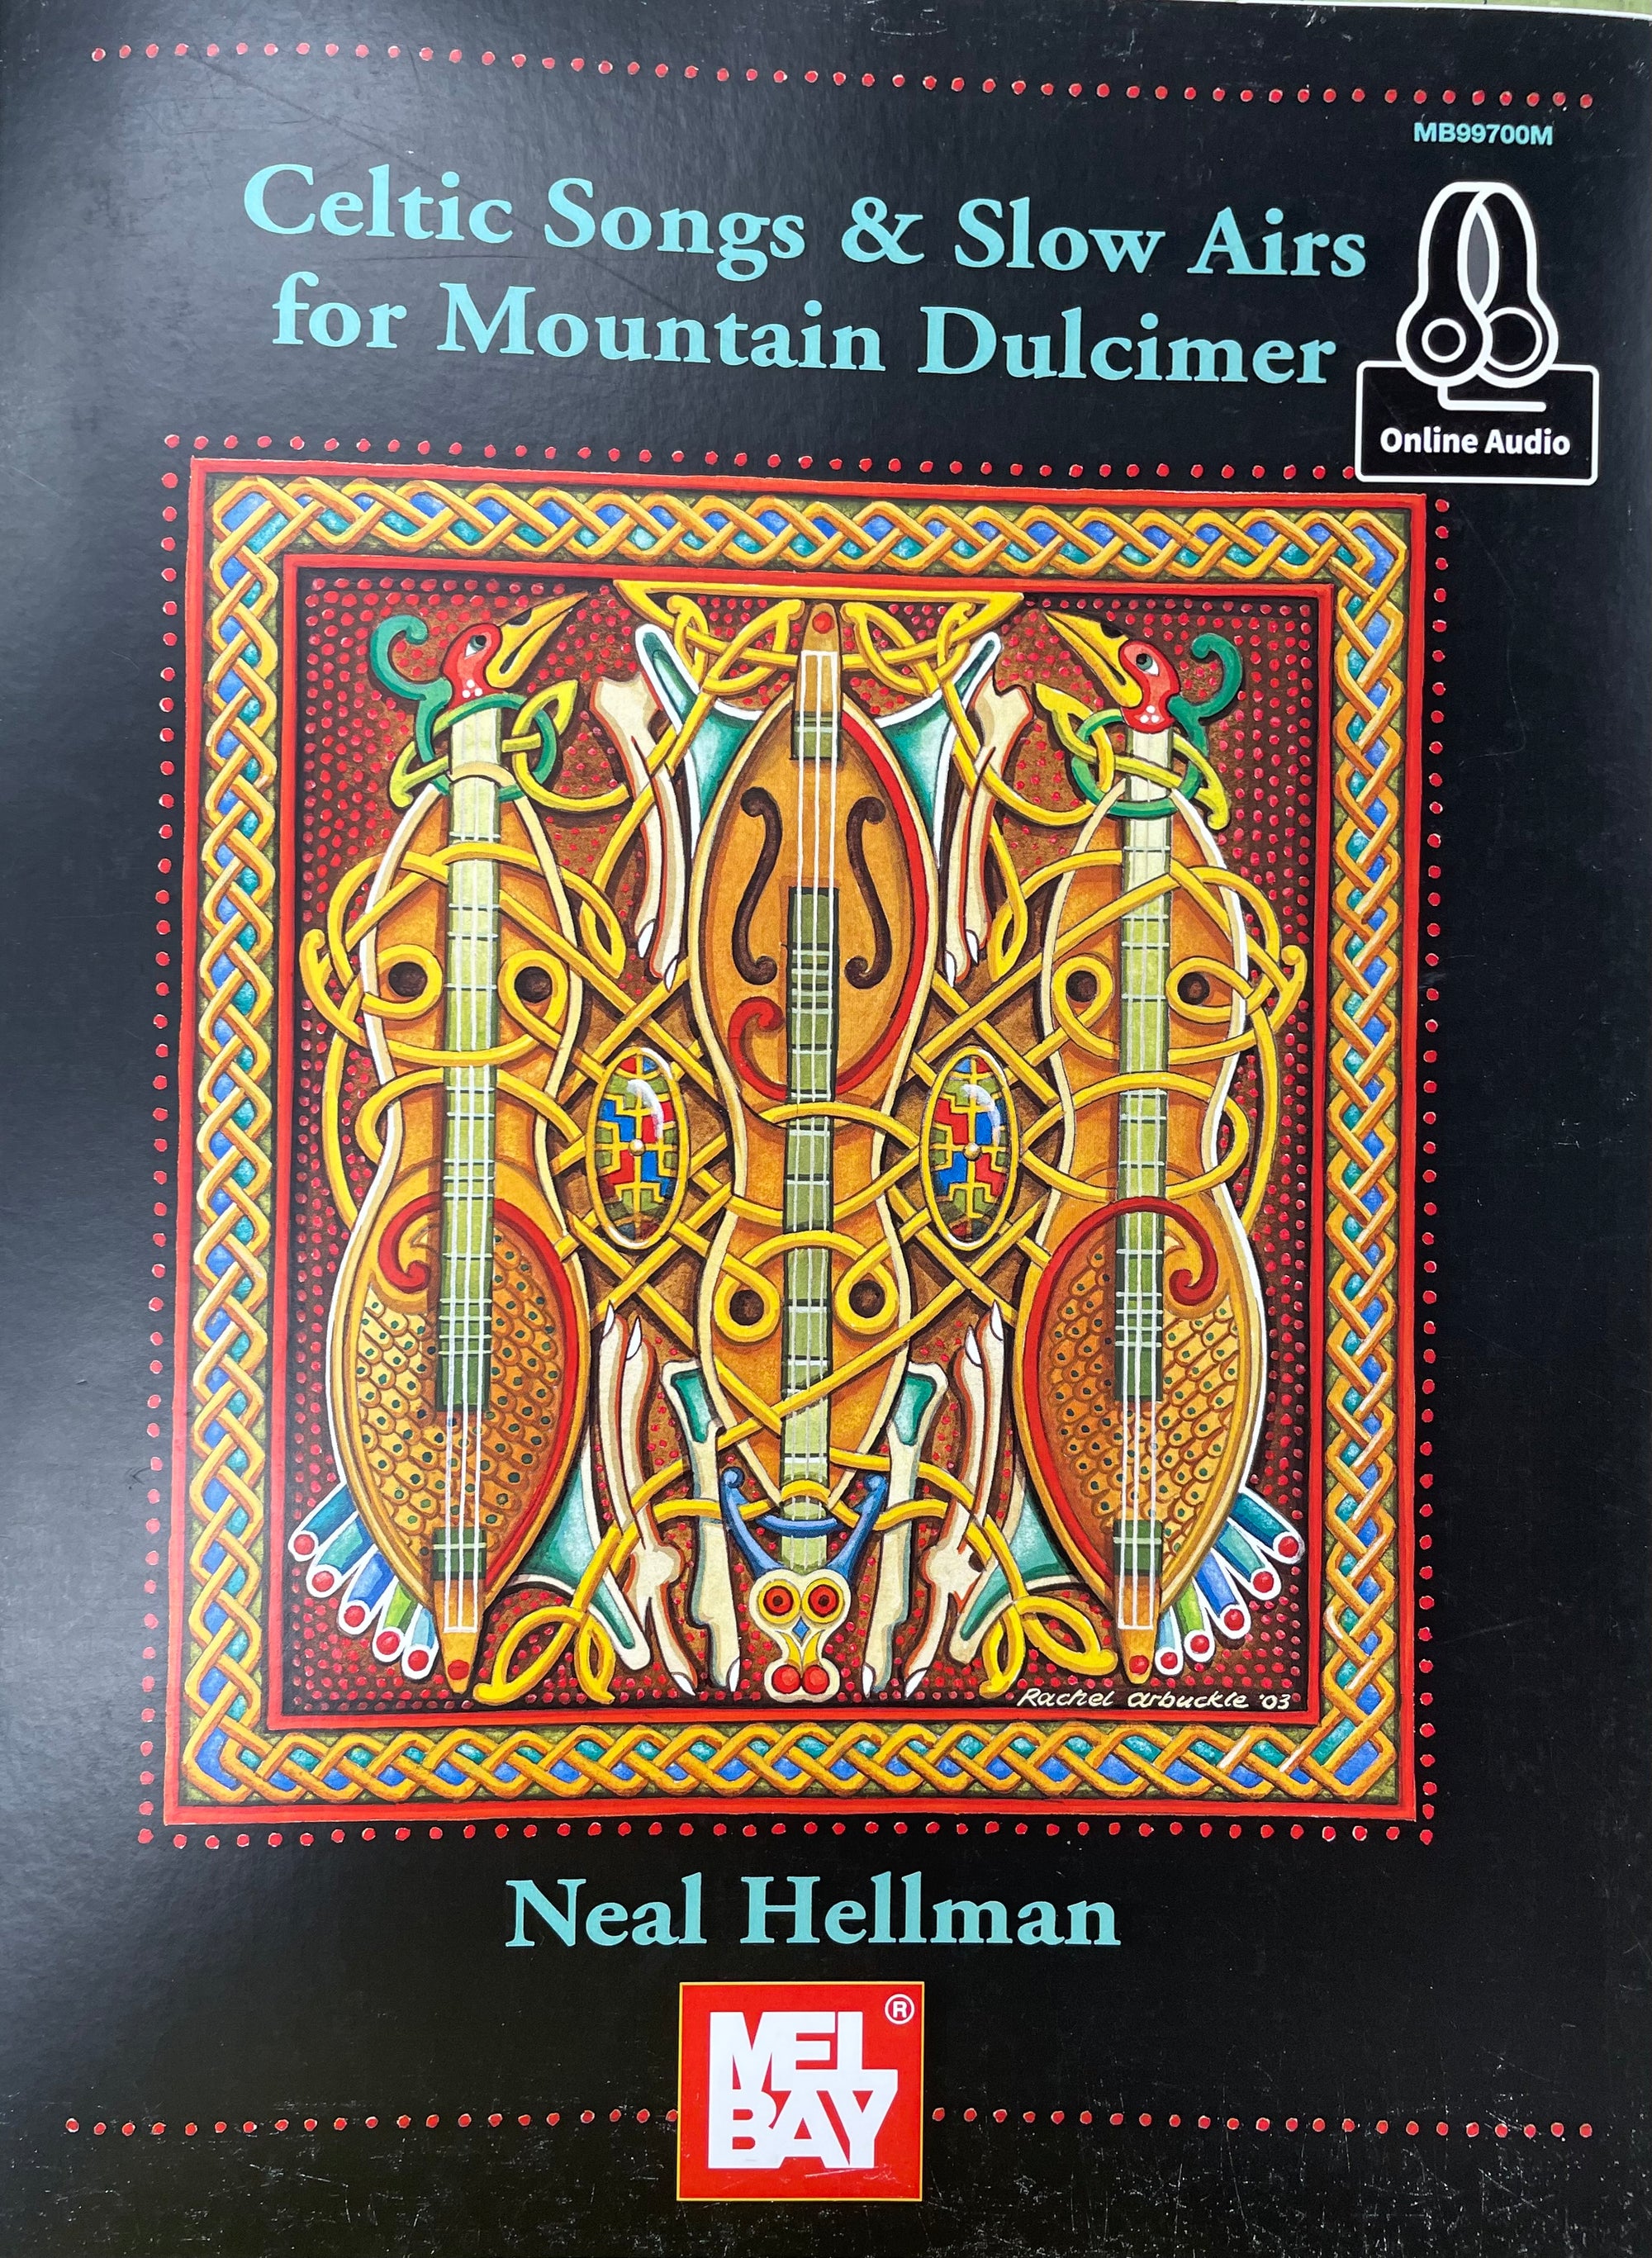 A book cover titled "Celtic Songs & Slow Airs for Mountain Dulcimer by Neal Hellman" with intricate artwork and an announcement of included online audio, specially designed for the